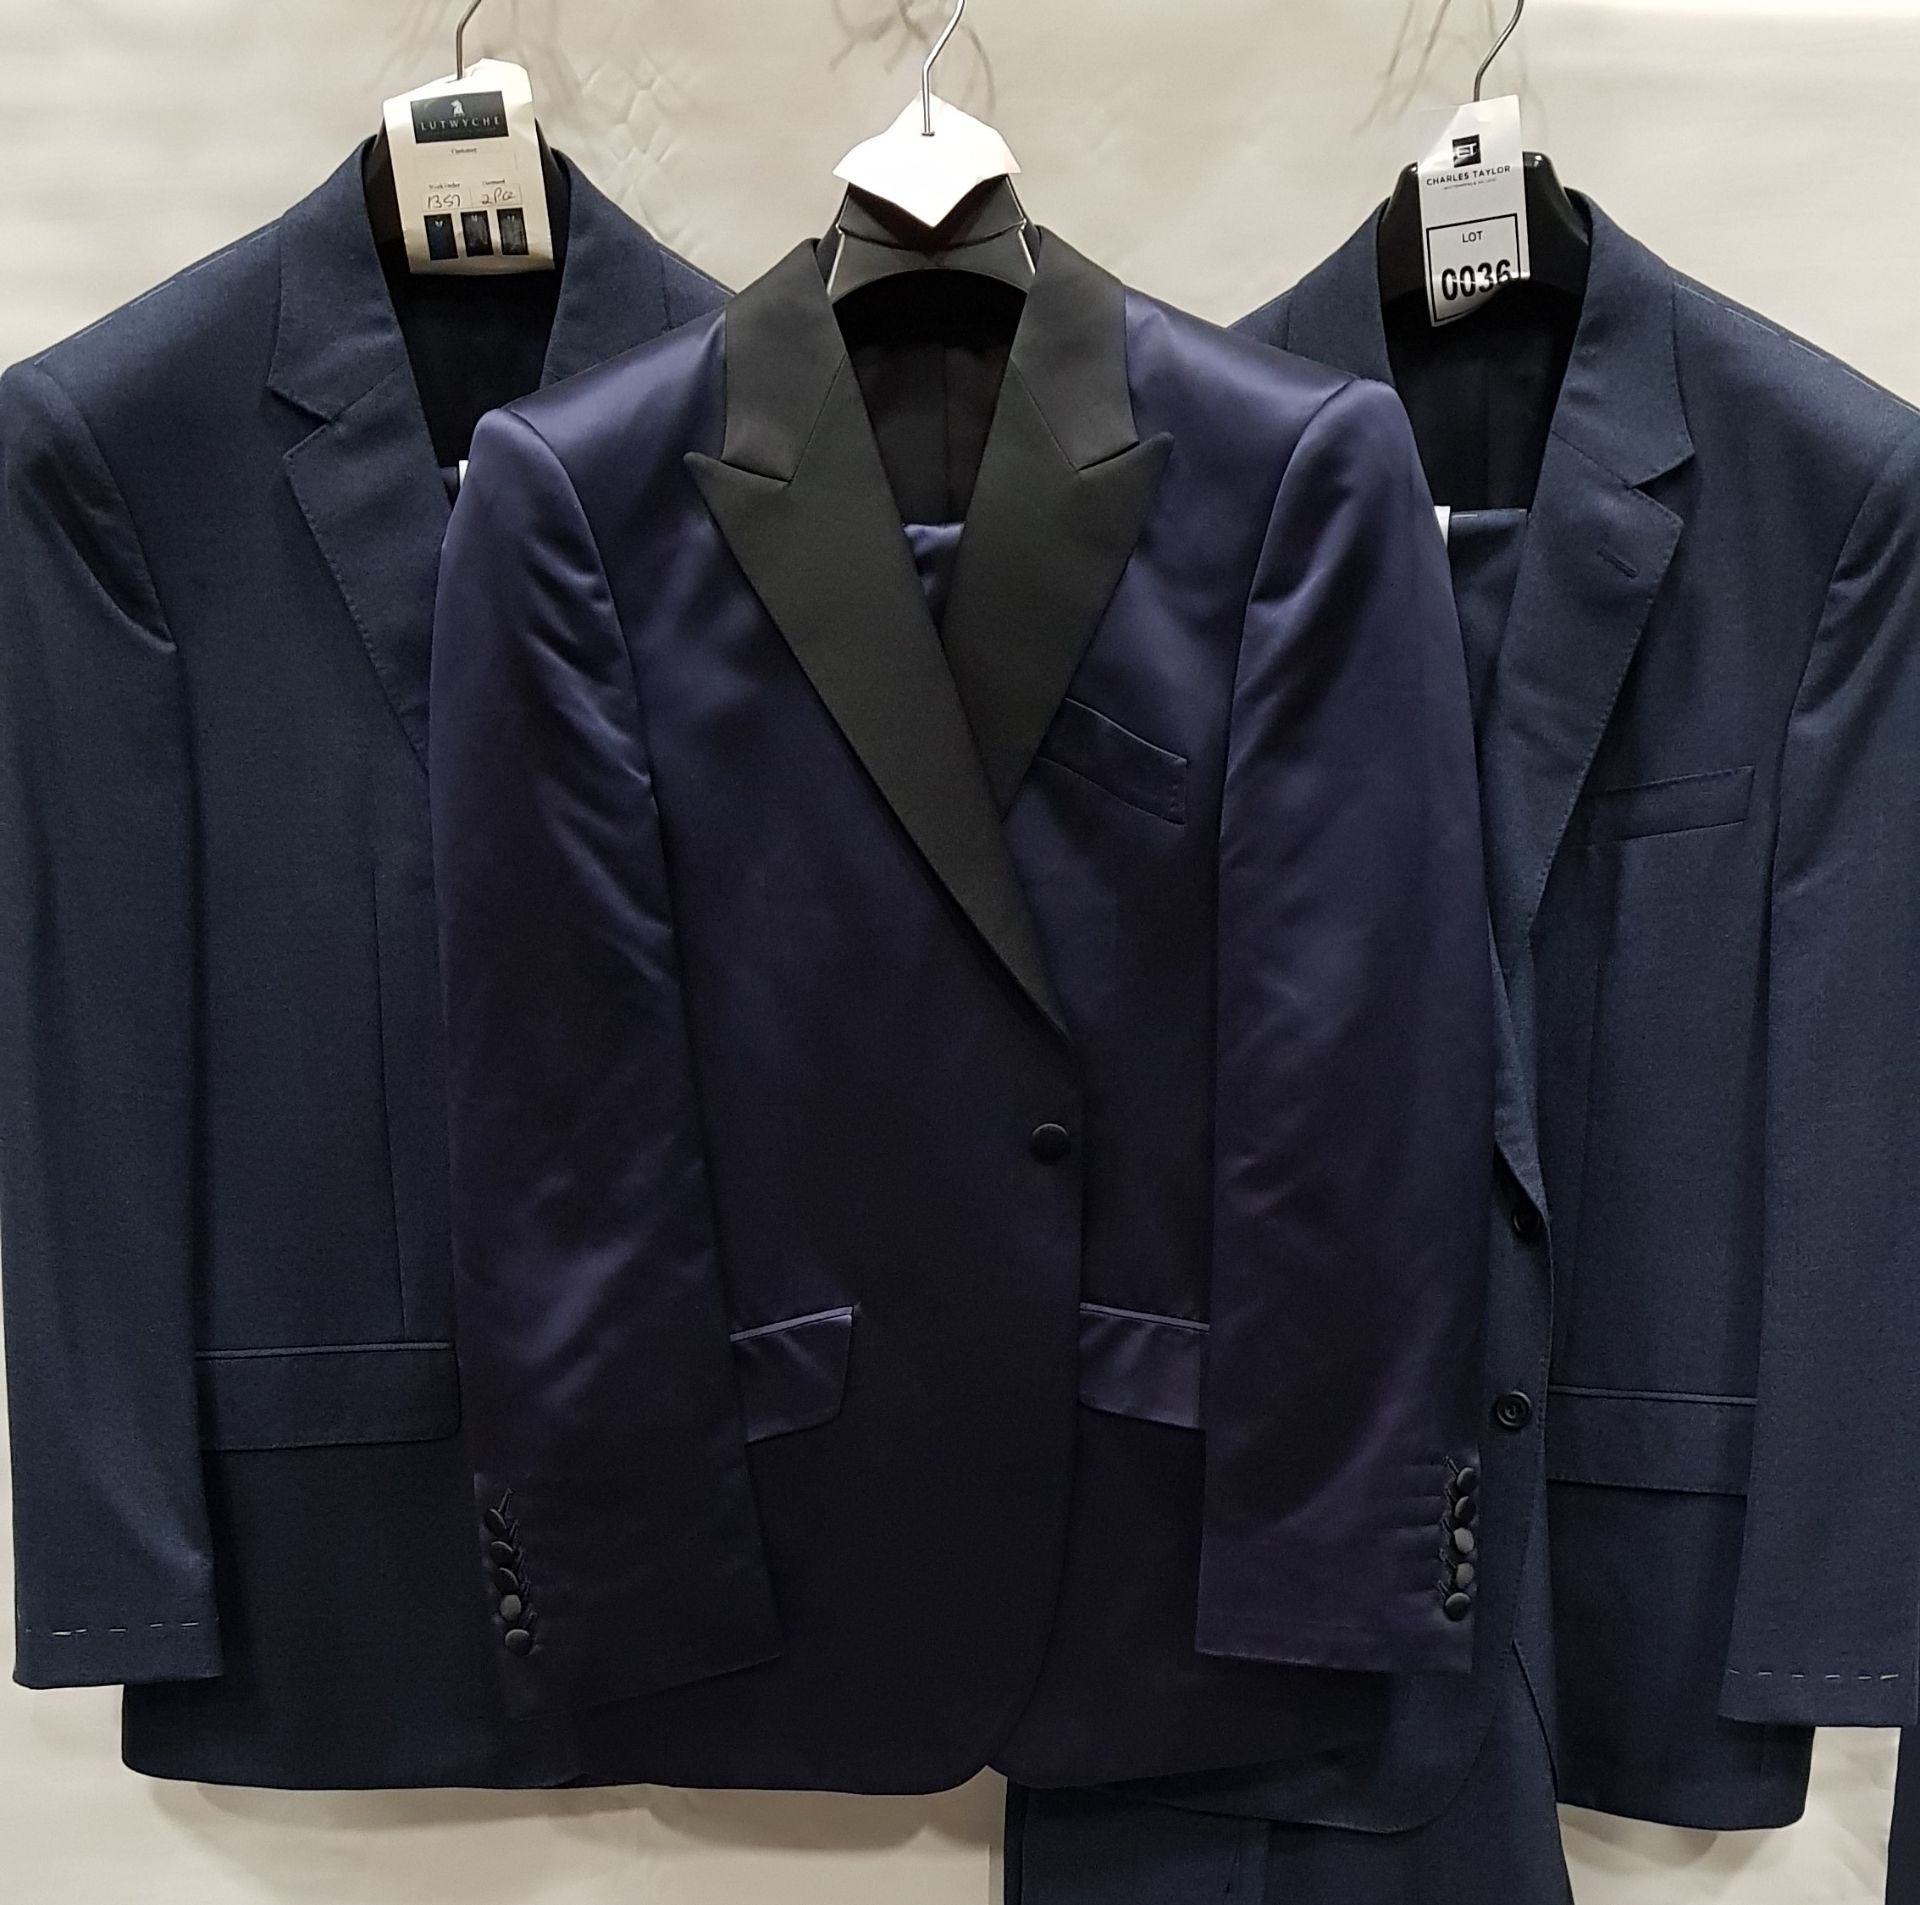 3 X BRAND NEW LUTWYCHE 2 PC DARK BLUE SHADES MATCHING SUITS SIZES 44R, 42R, 39R (NOTE NOT FULLY